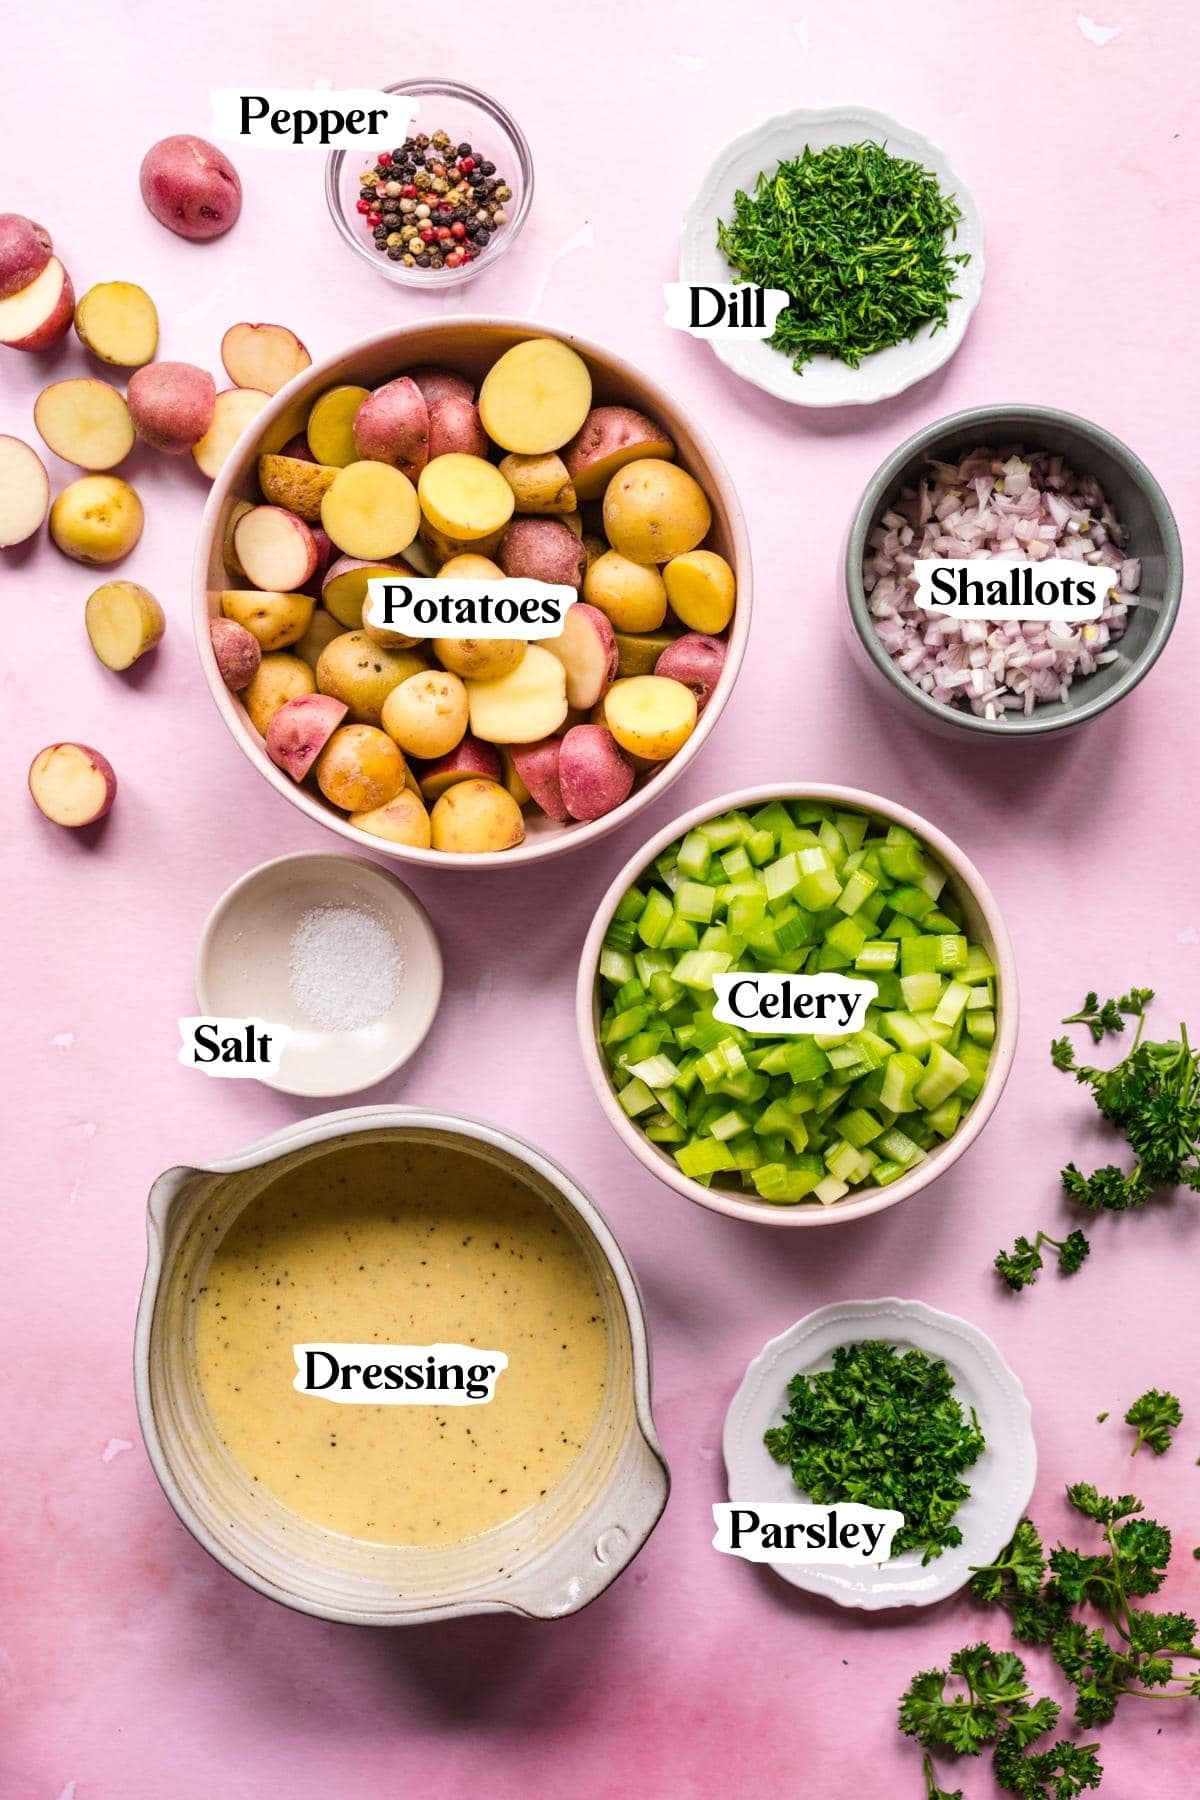 Overhead view of ingredients for dill potato salad in small prep bowls on pink backdrop.